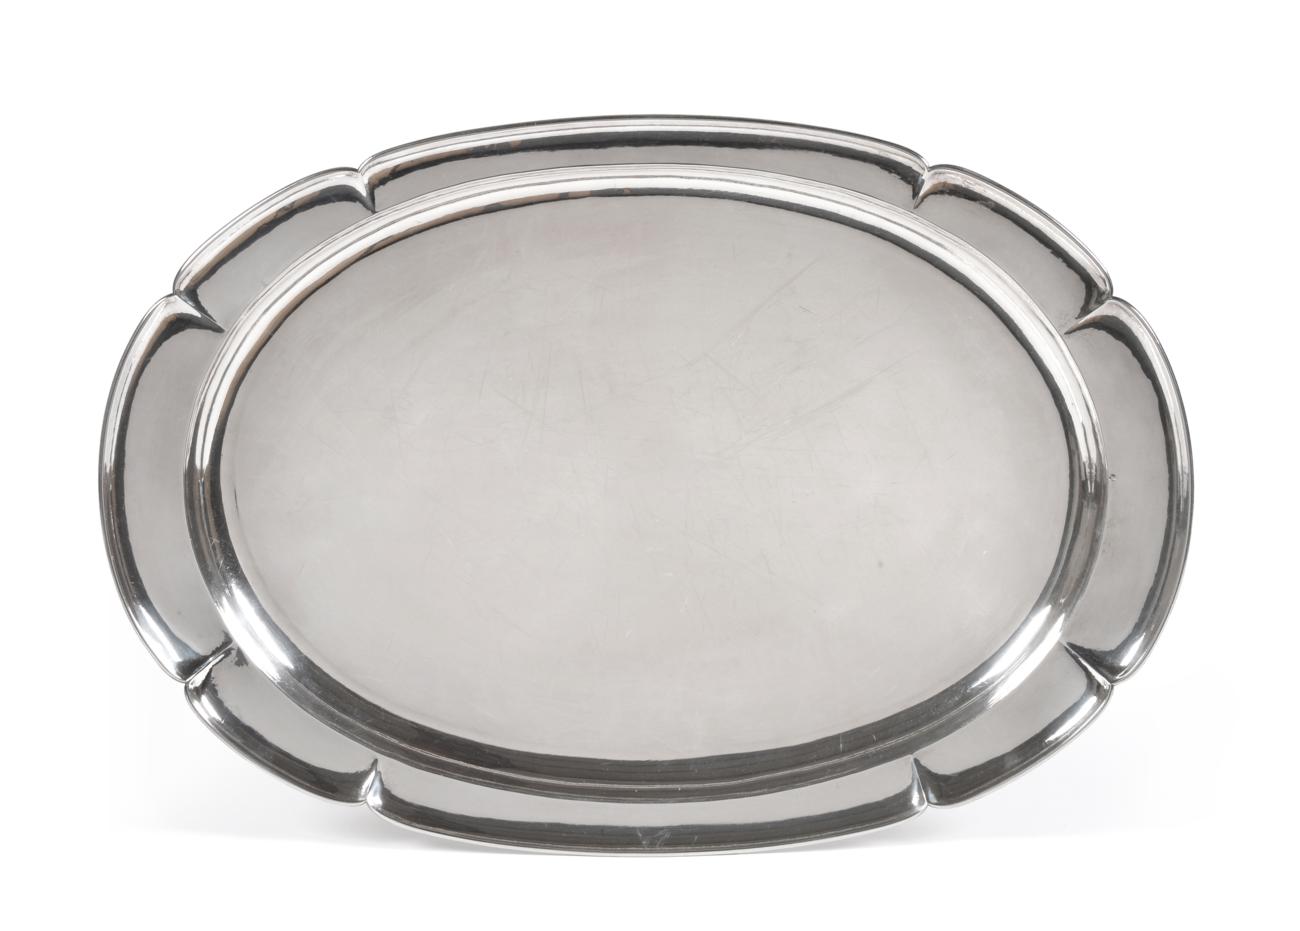 Lot 91 - An American Arts and Crafts Sterling Silver Platter, The Kalo Shop, Chicago 1929-1932, shaped...